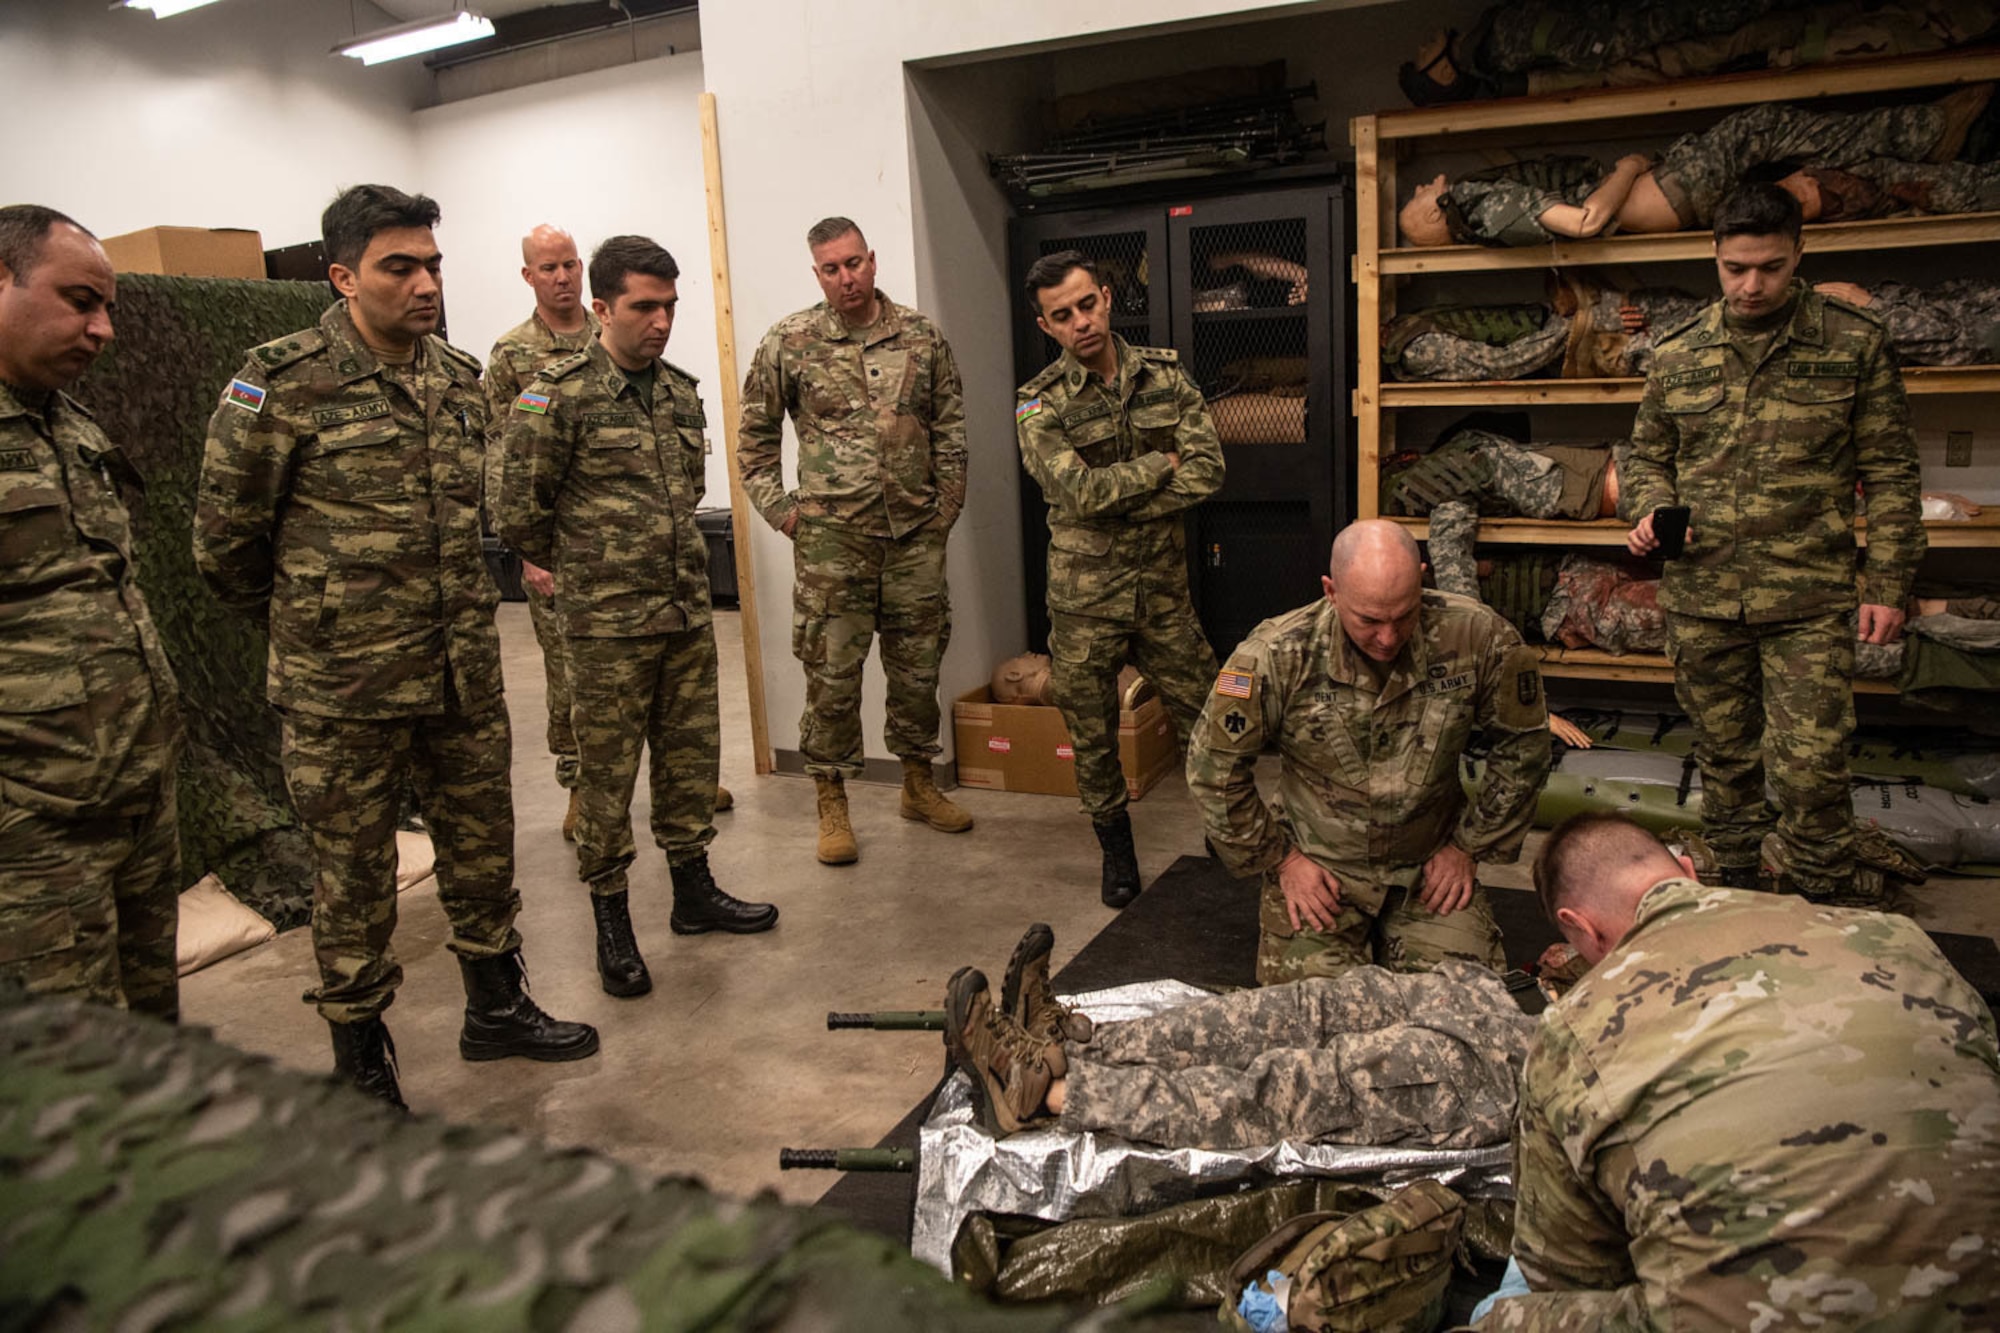 Soldiers simulate first aid treatment on mannequin